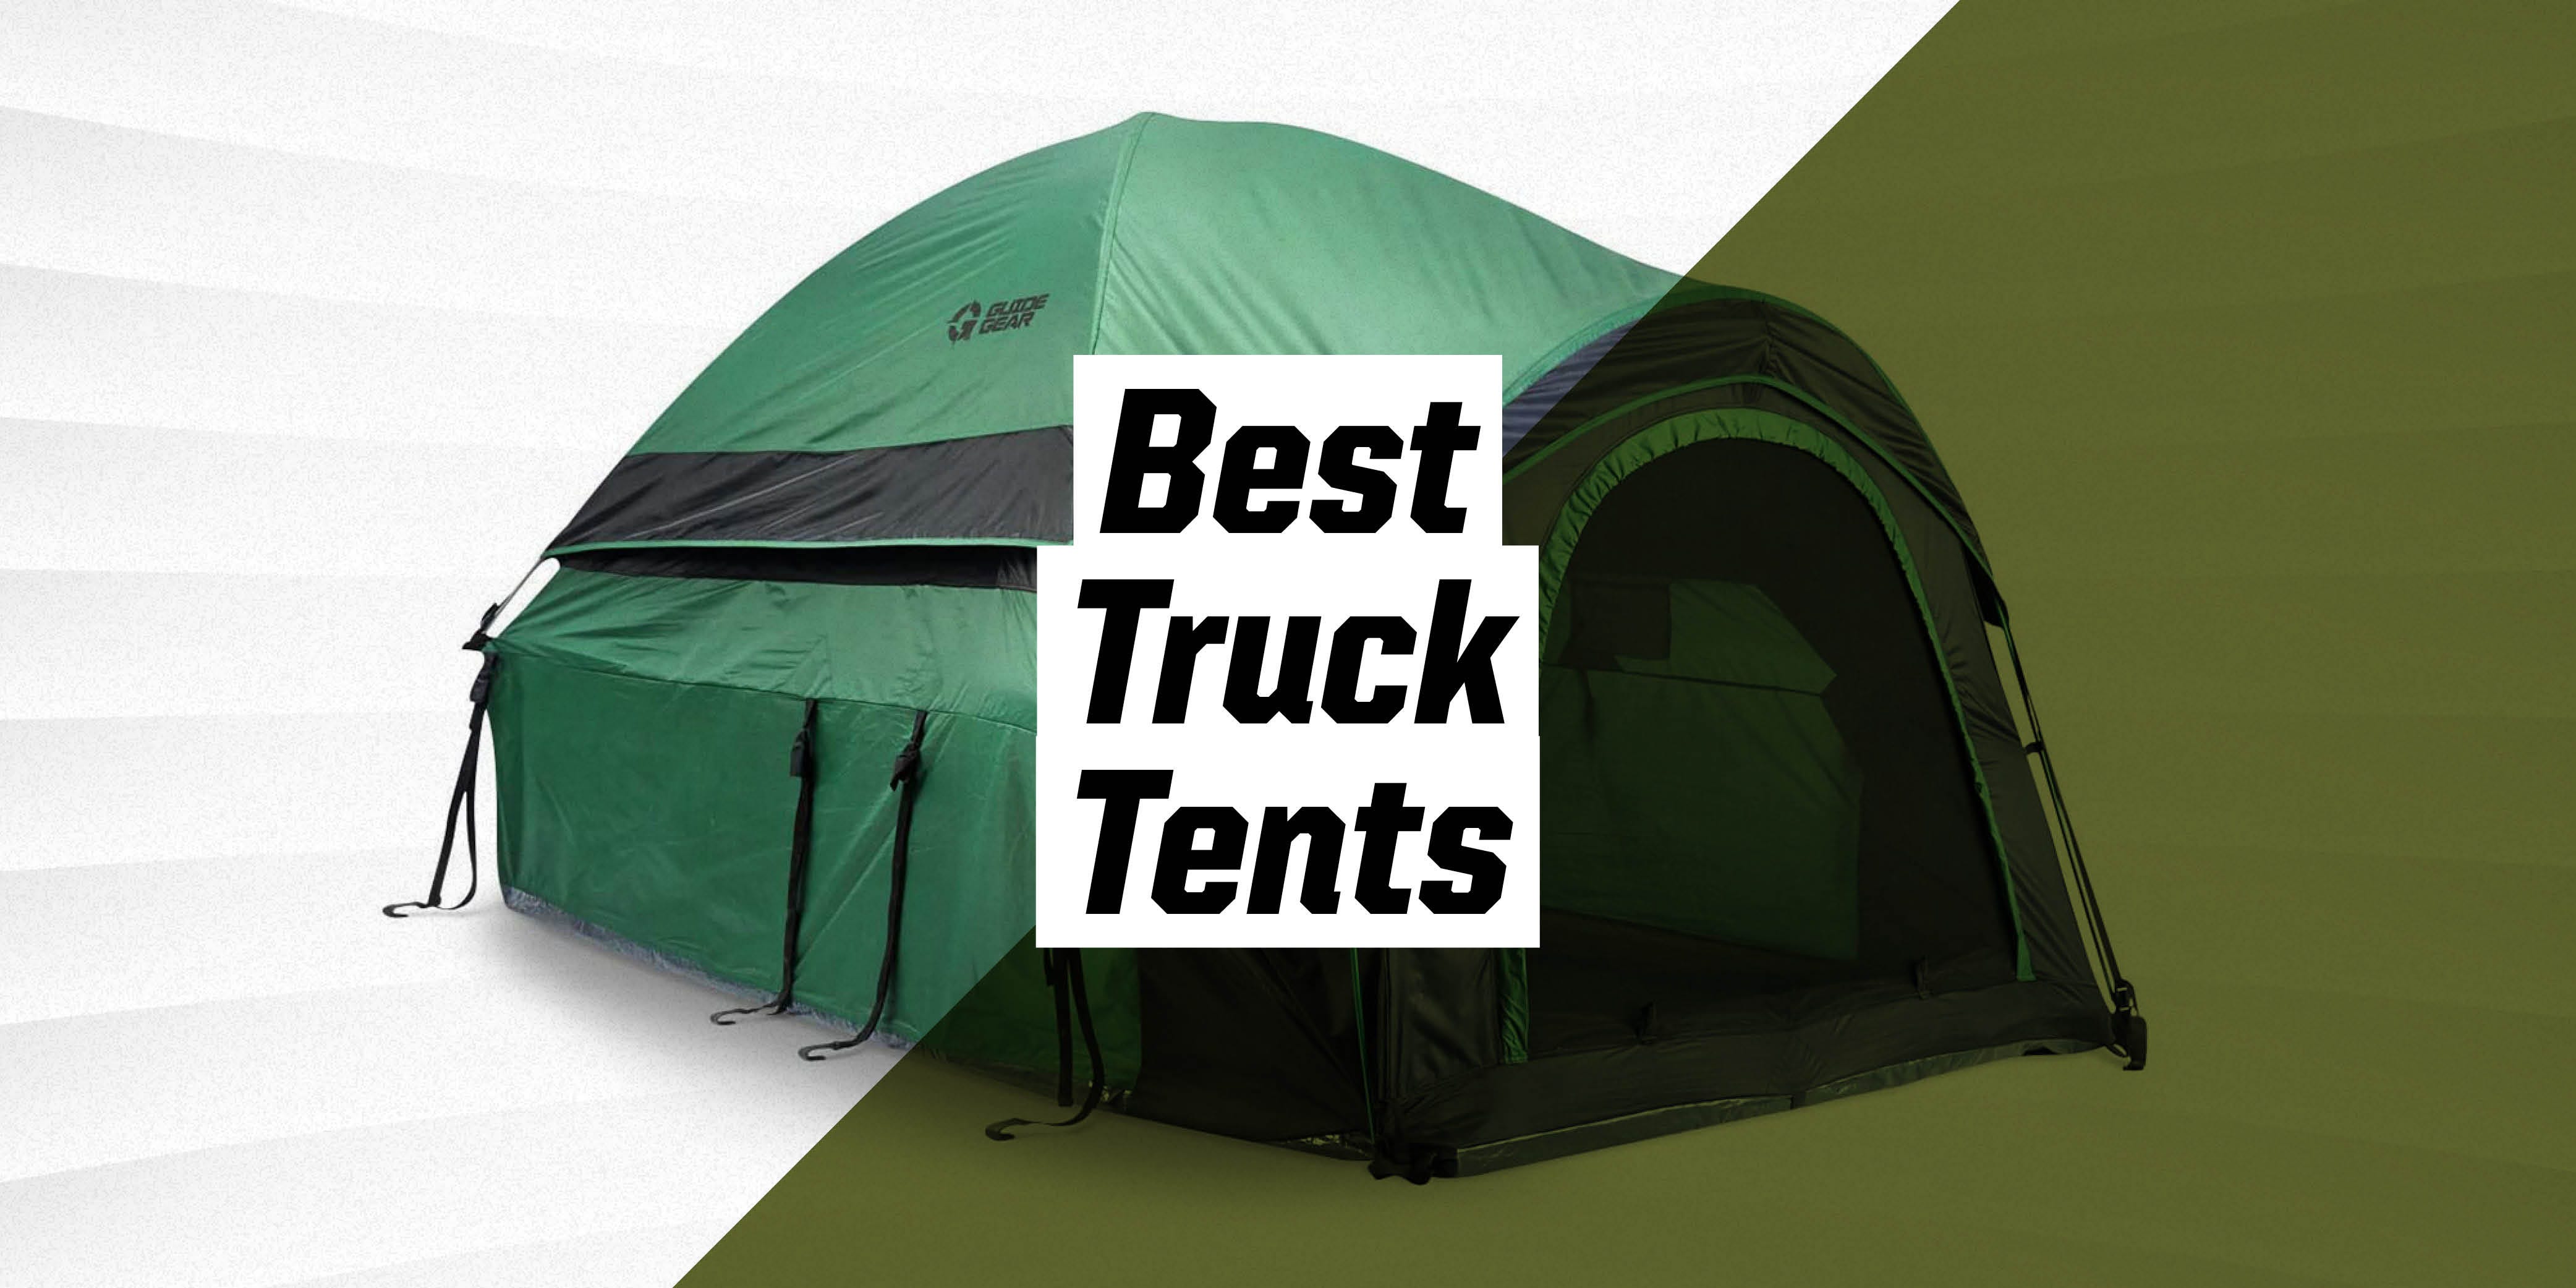 The Best Truck Tents for Sheltering in Your Rig